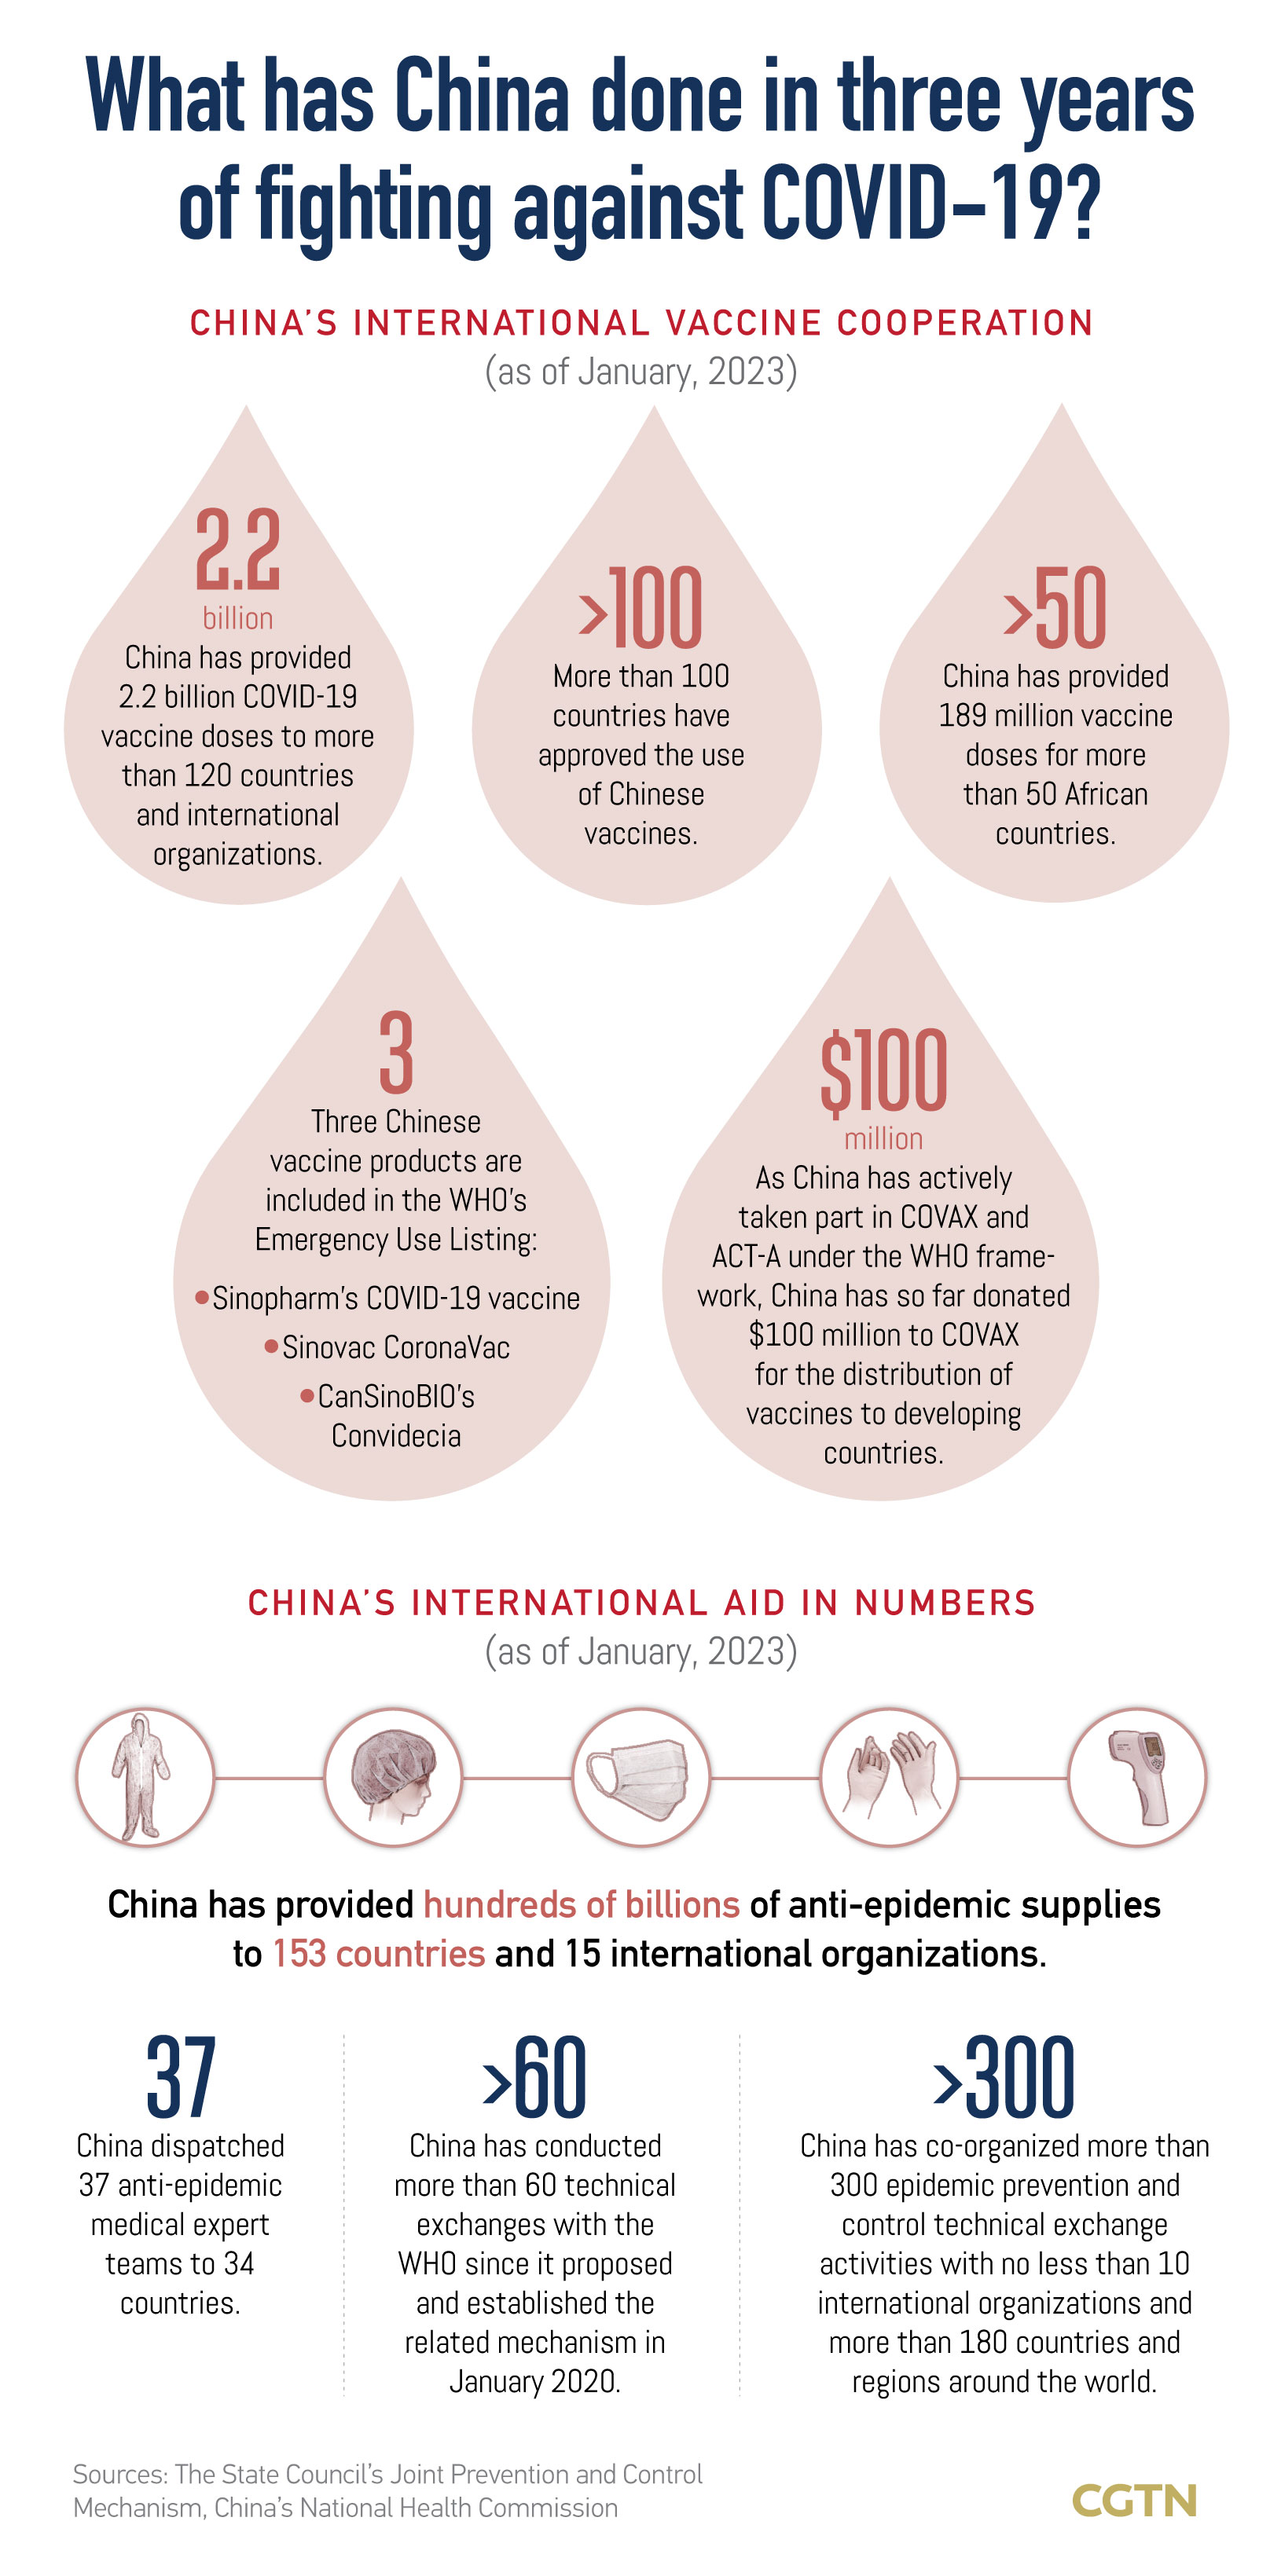 How China keeps its promise to build a community of common health for mankind